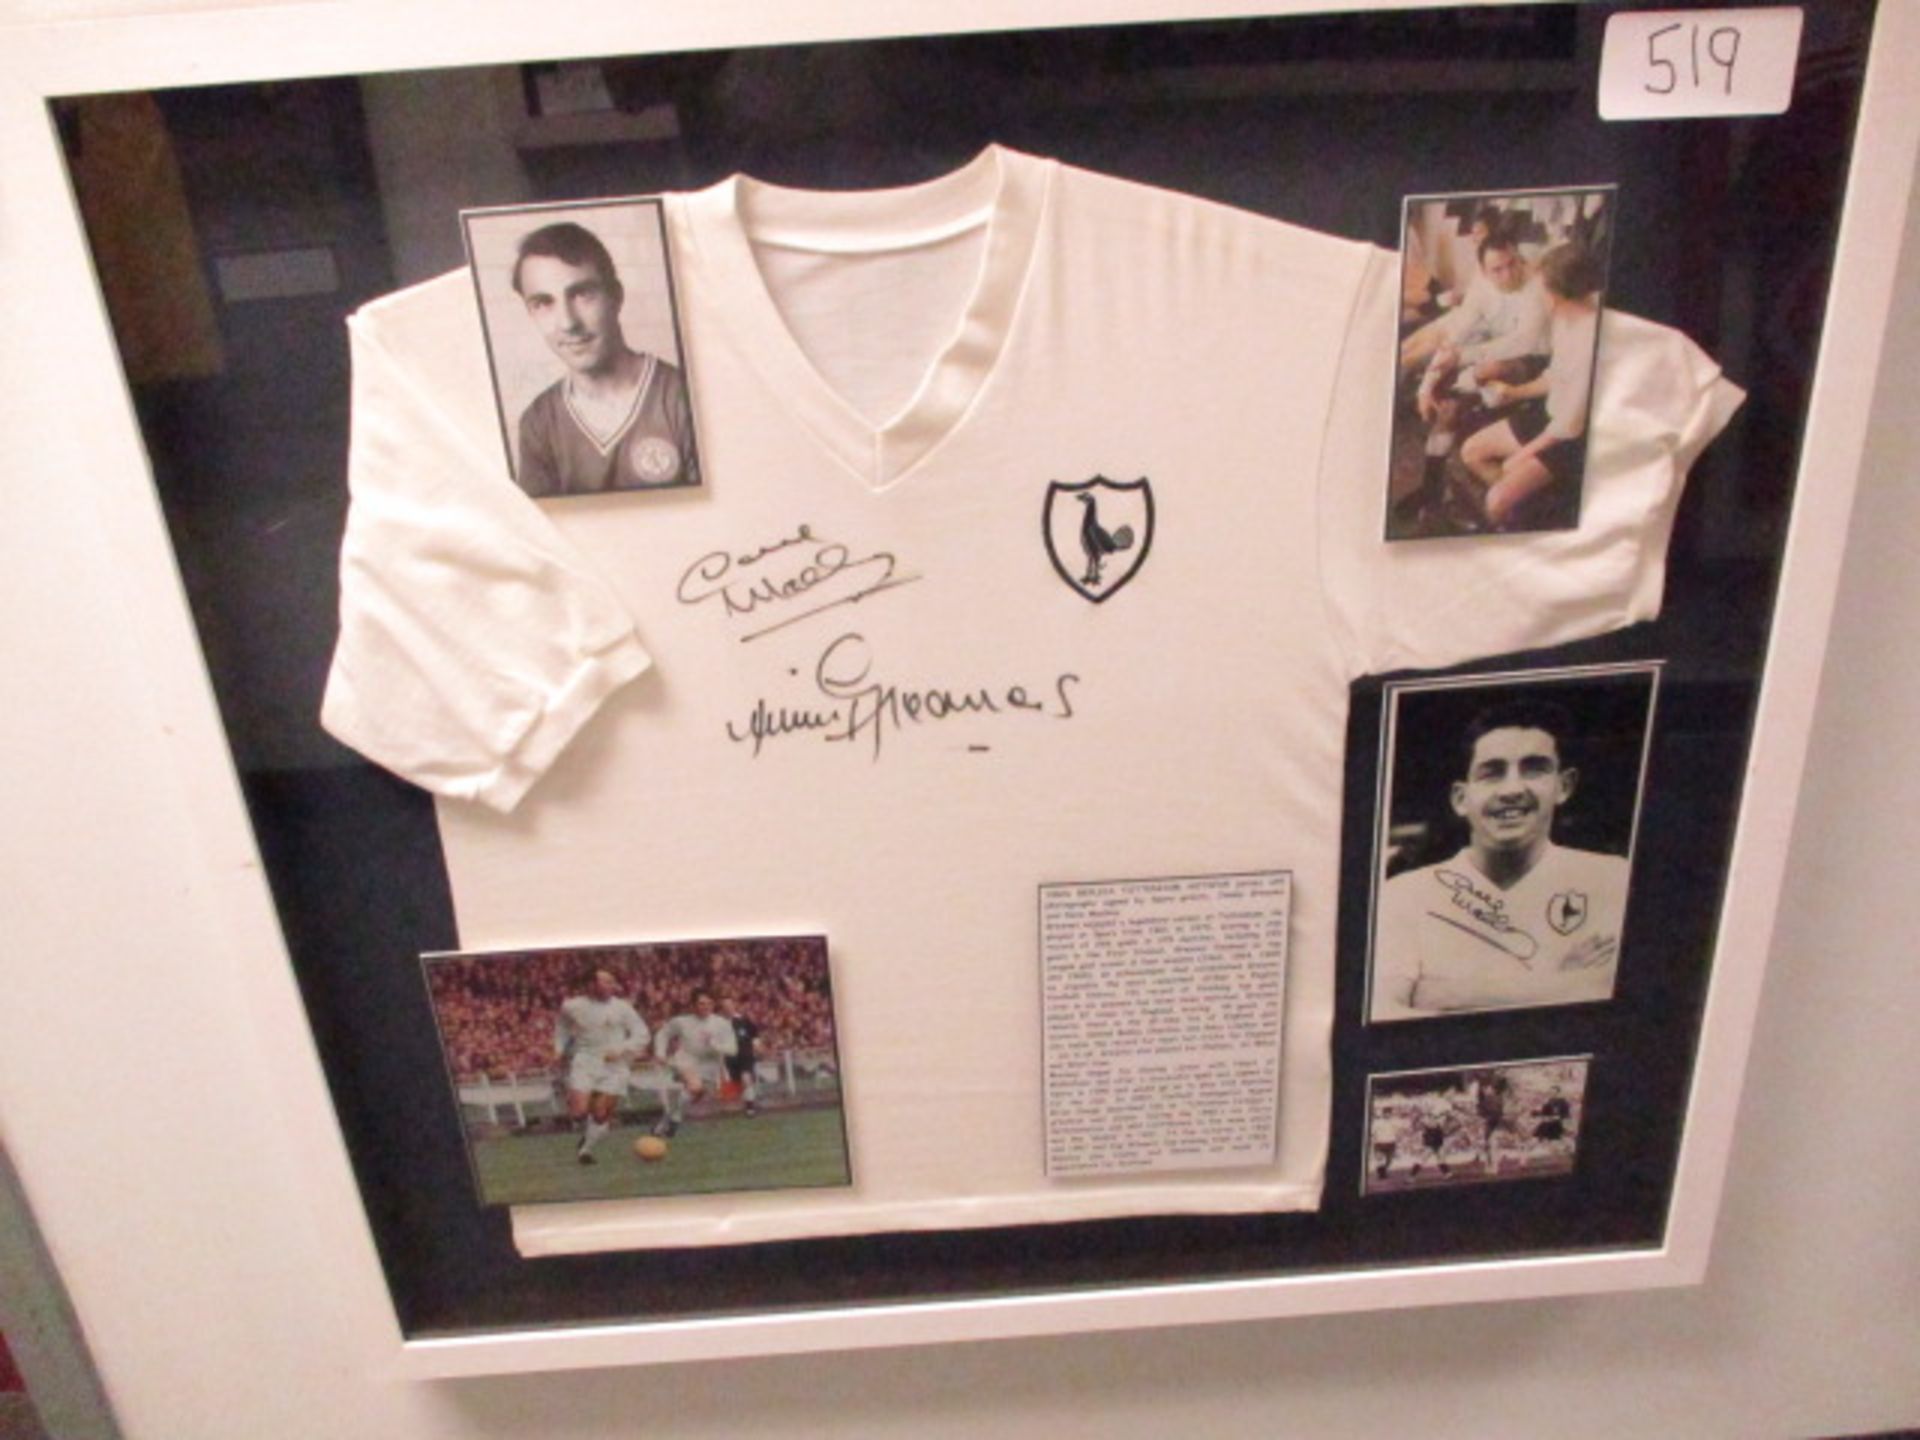 Tottenham Hotspur 1960s replica jersey signed by Jimmy Greaves and Dave Mackay, plus 5 signed photos - Image 2 of 3